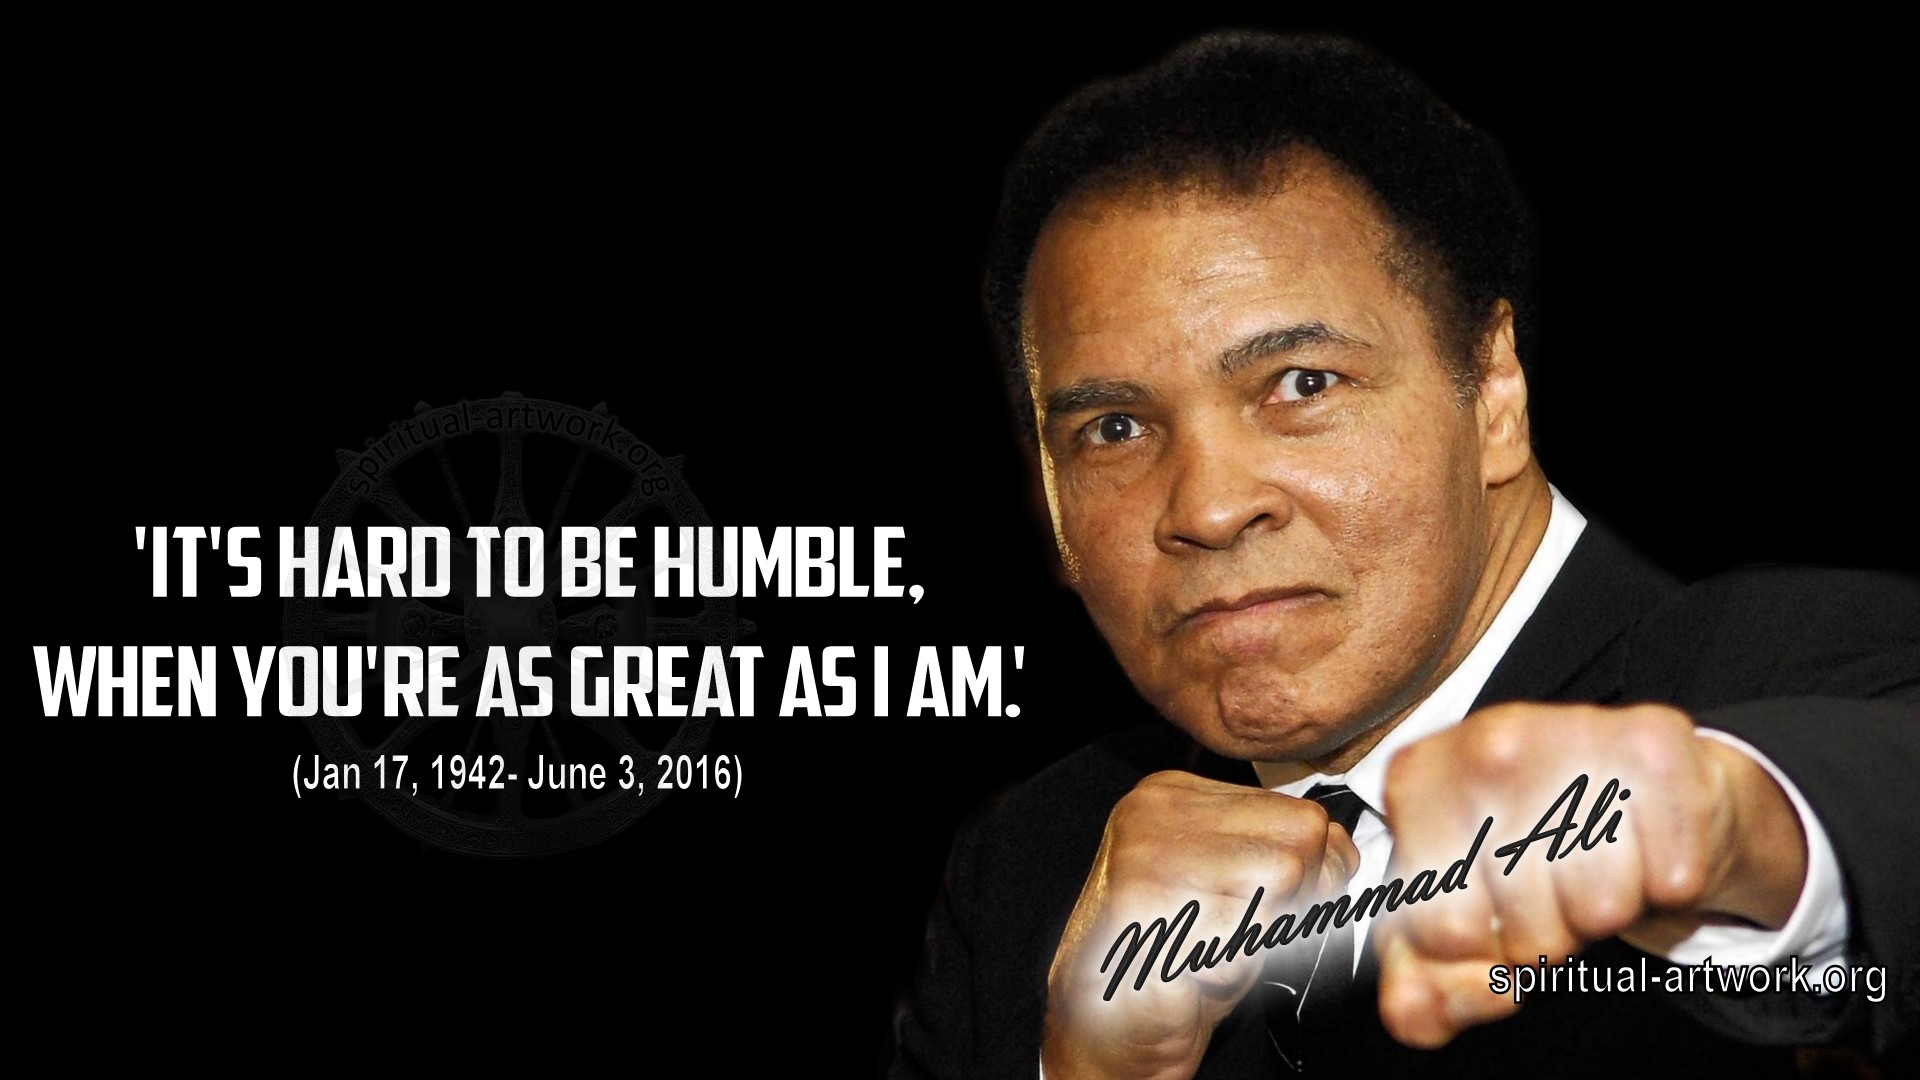 1920x1080 Muhammad Ali- Its Hard to be Humble when you're as great as I